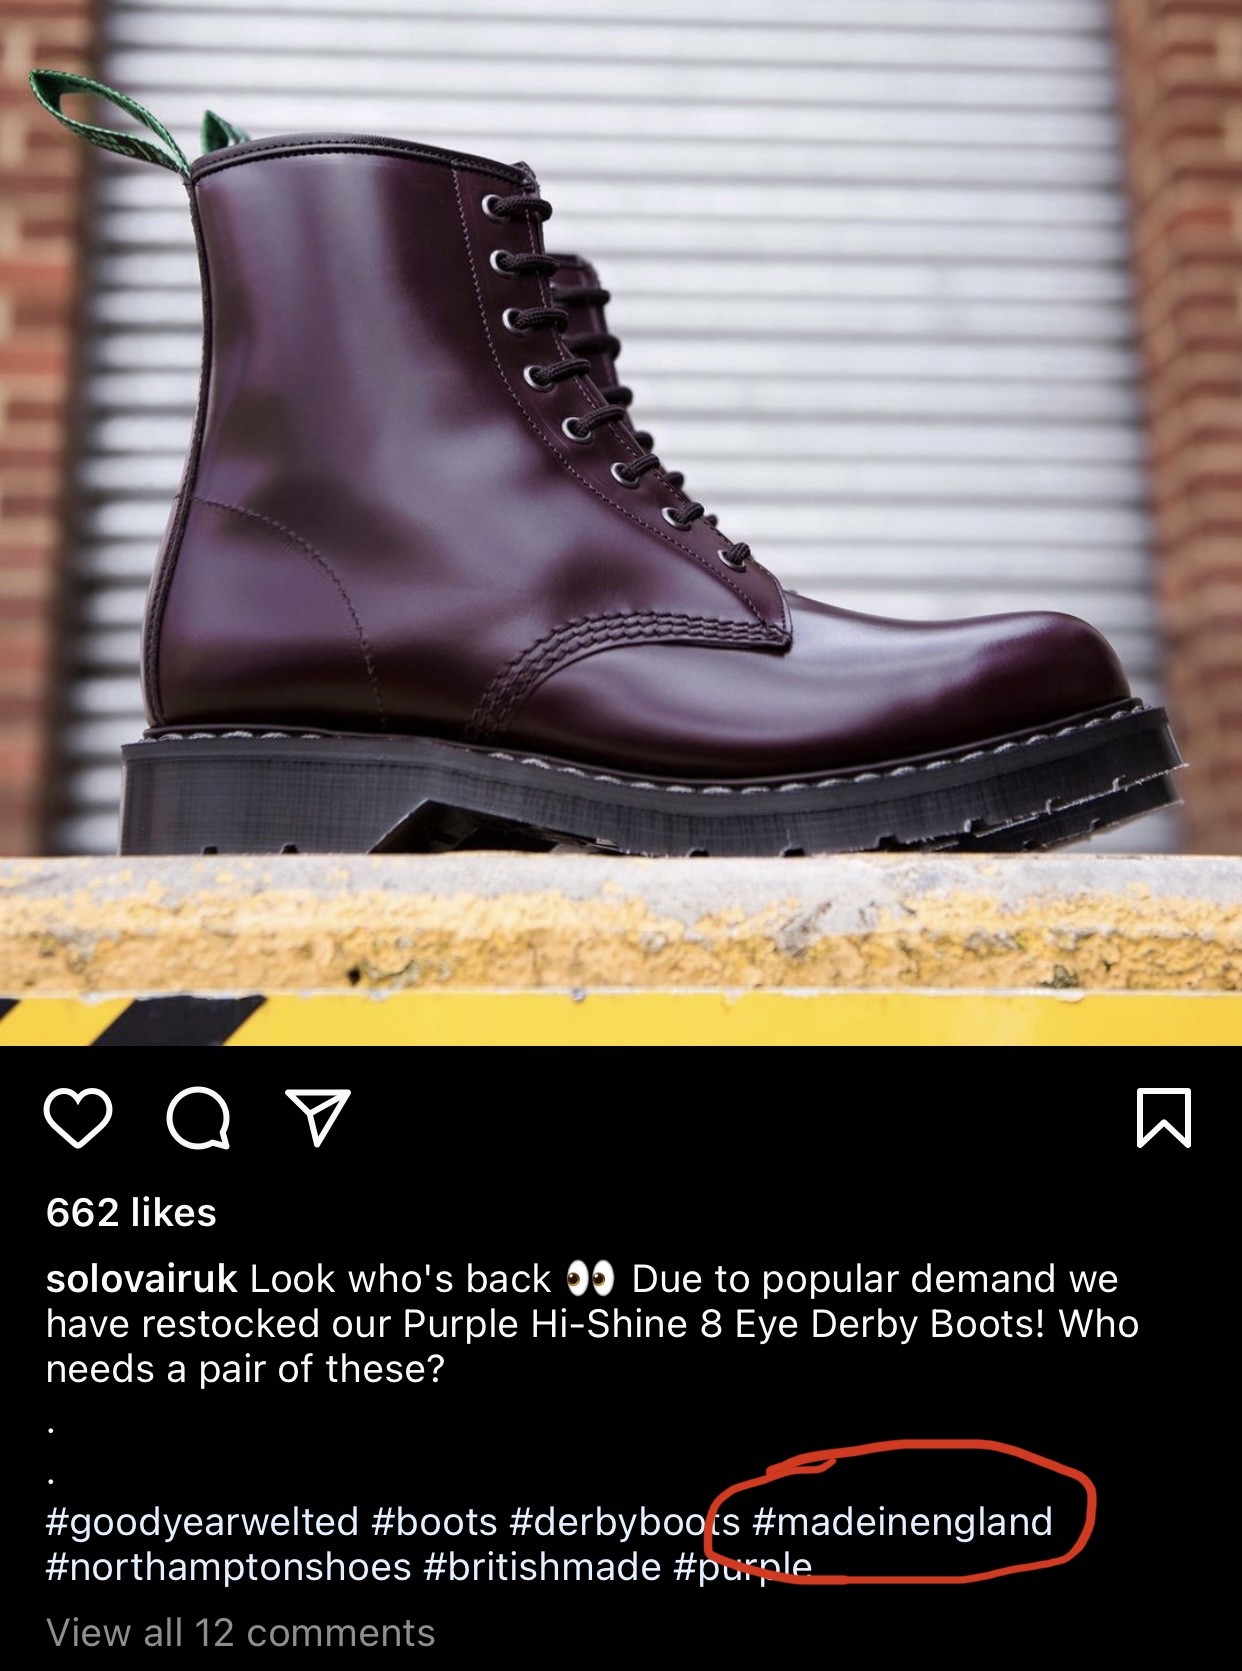 An example of an Instagram post using the hashtag #madeinengland that shows a photo of boots made by a company in England.